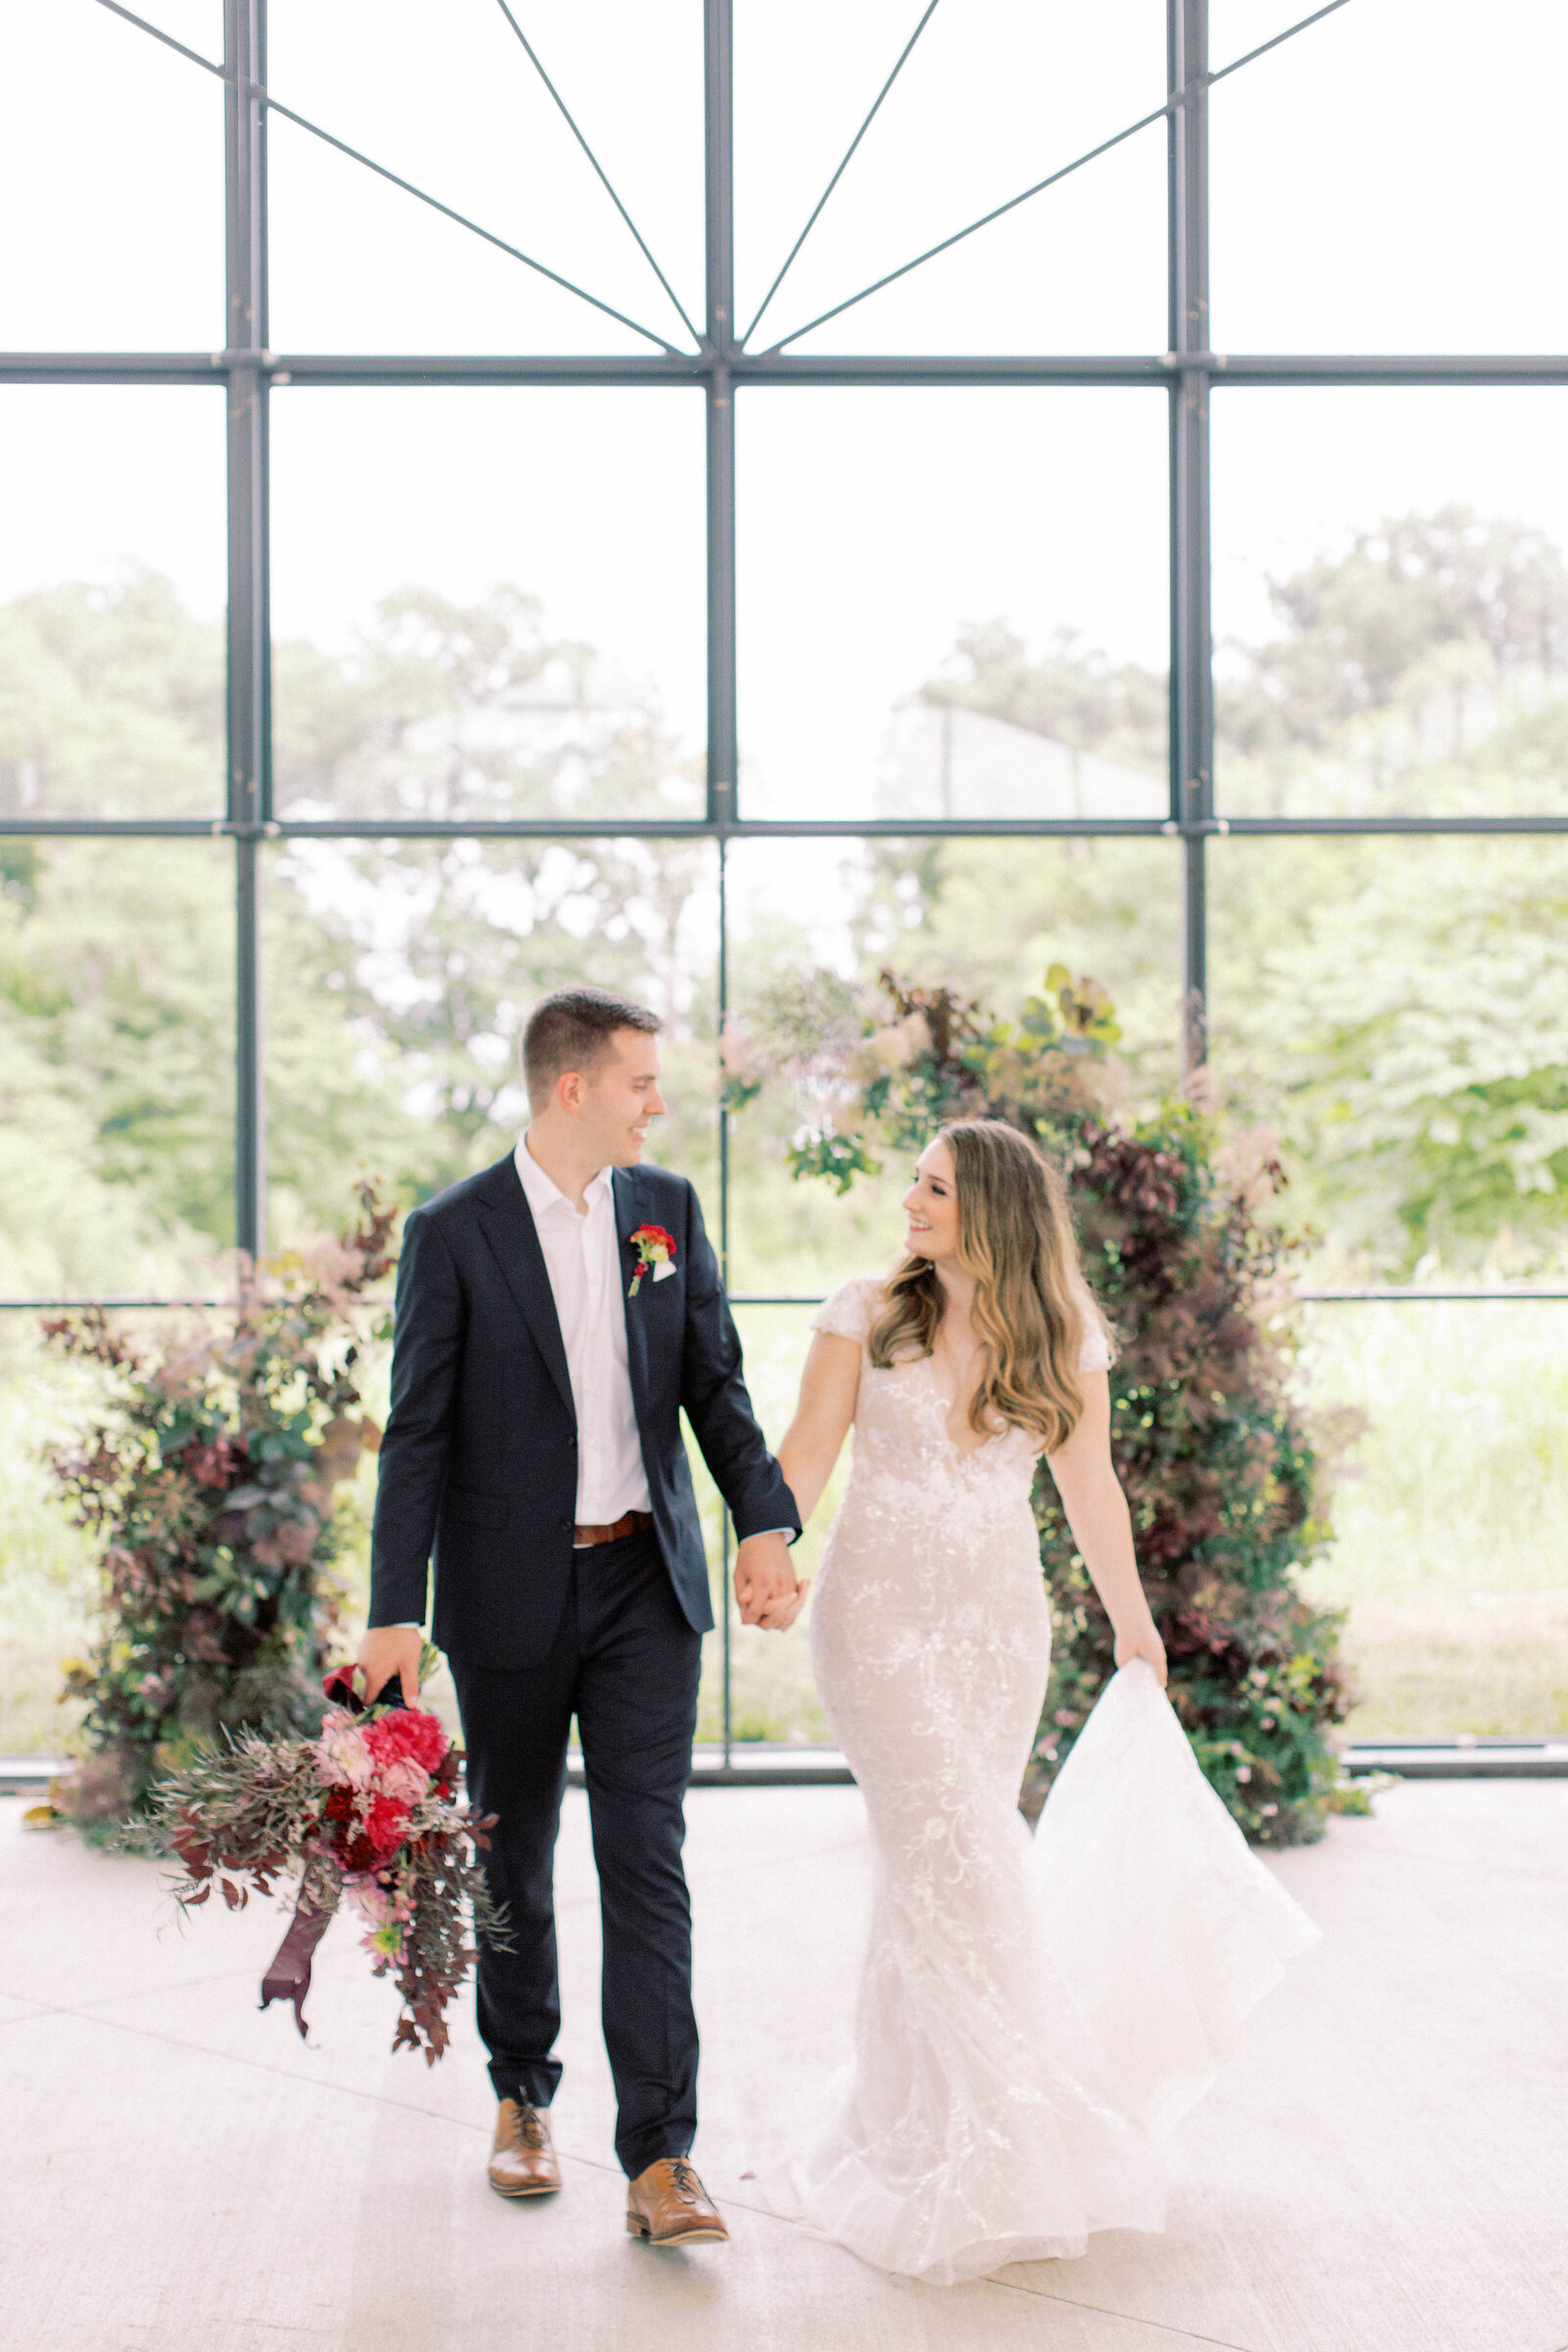 Bride and groom walk holding hands in front of floral altar at A-Vent Event Space